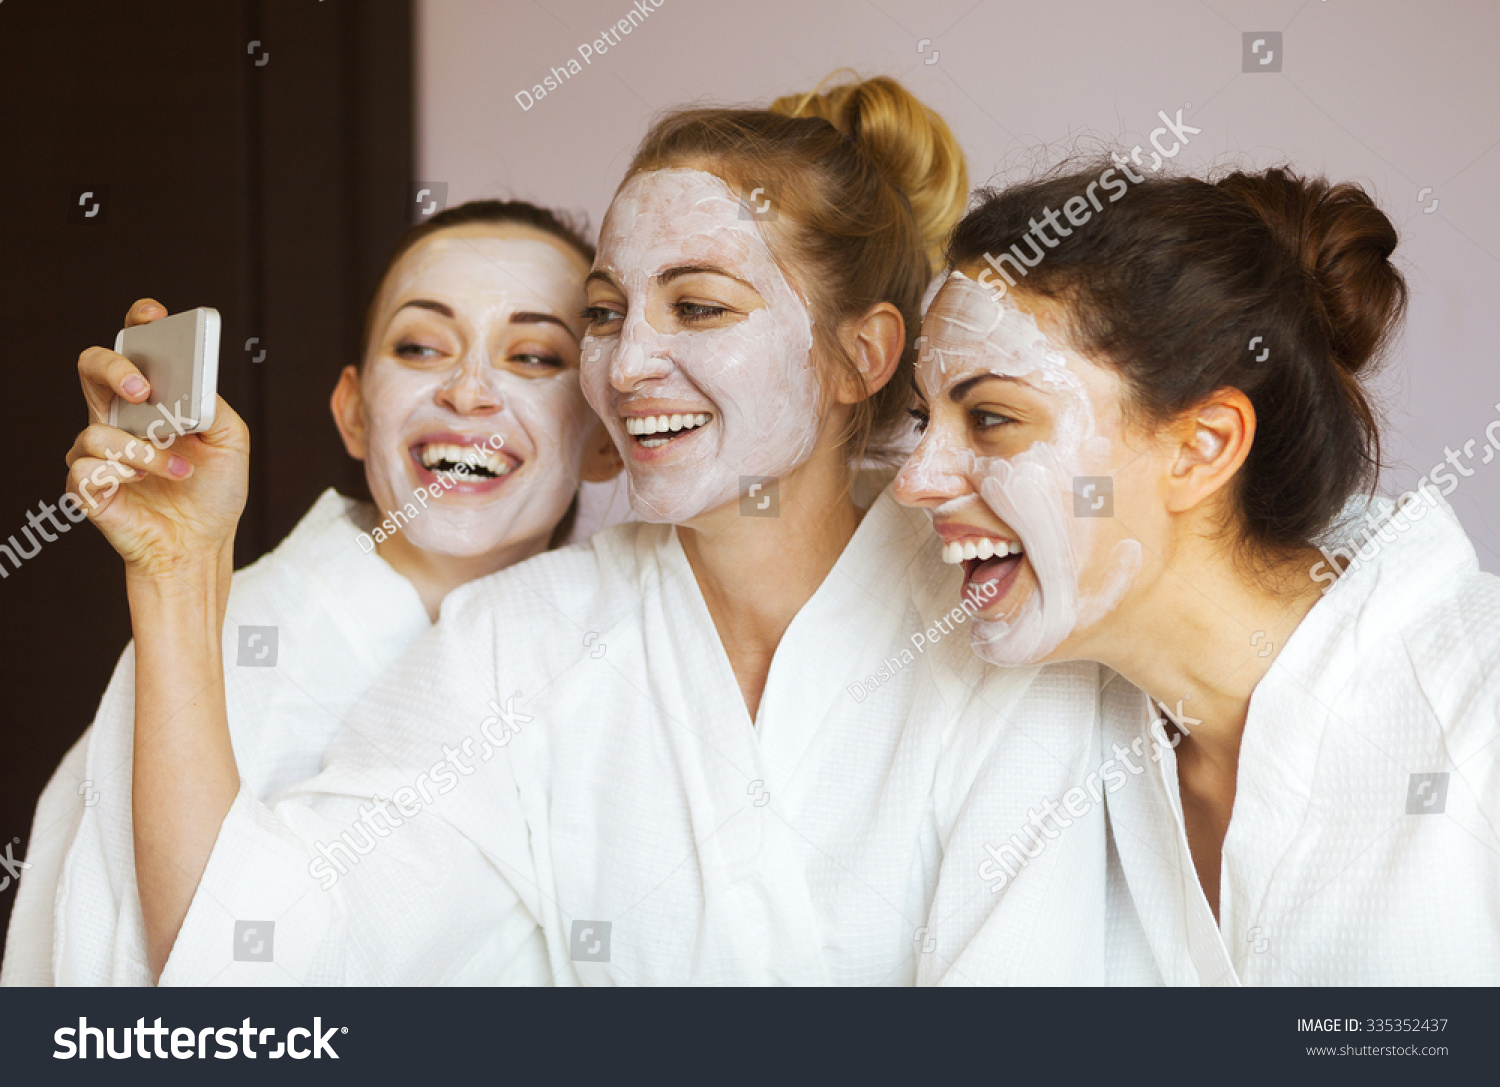 Three young happy women with face masks taking selfi at spa resort. Frenship and wellbeing concept #335352437